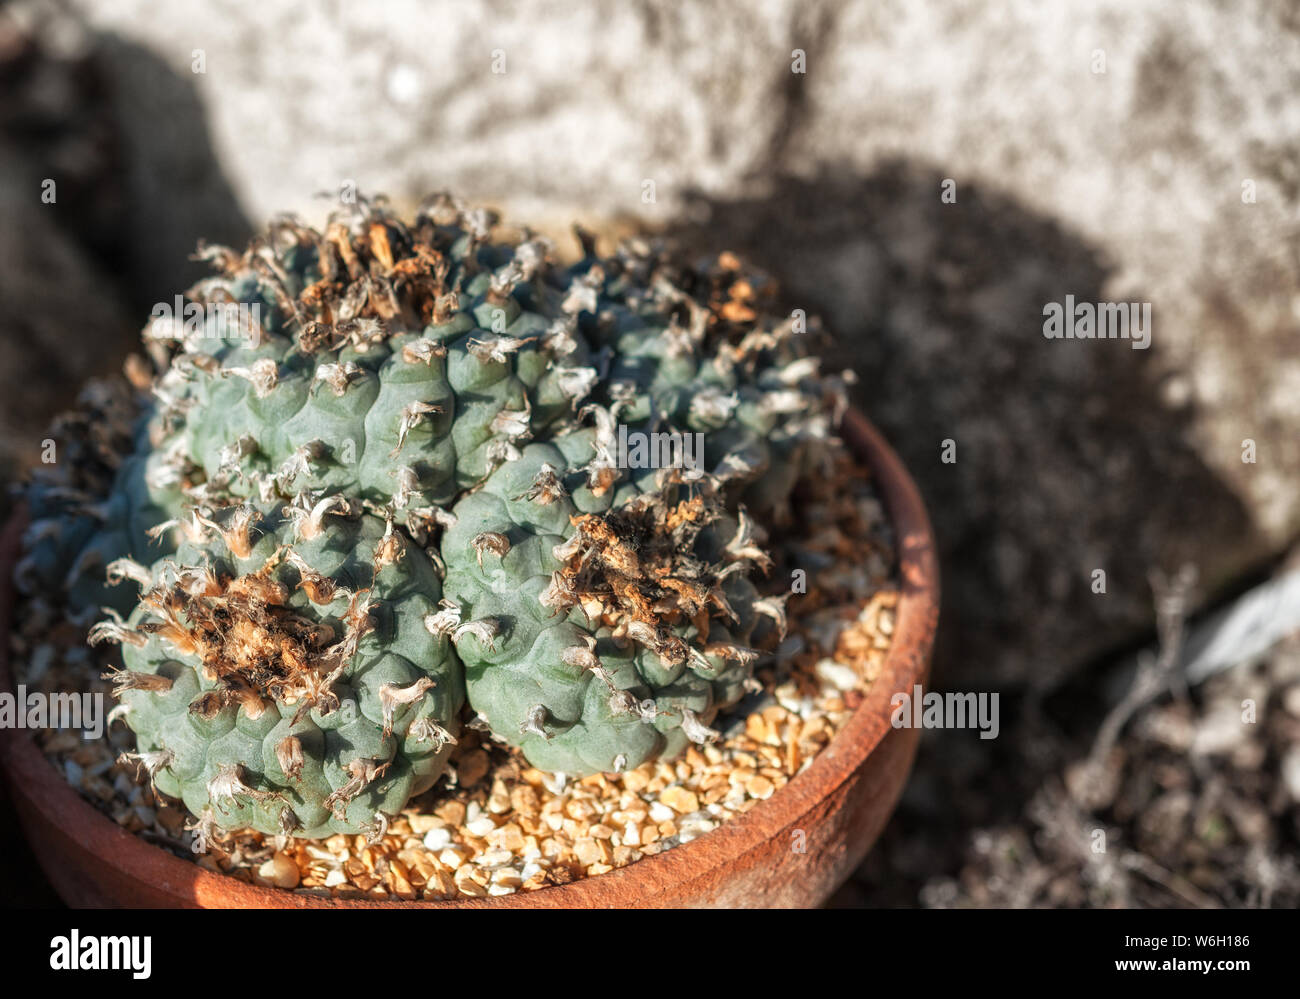 Lophophora williamsii or peyote is a small, spineless cactus with psychoactive alkaloids, particularly mescaline. Stock Photo